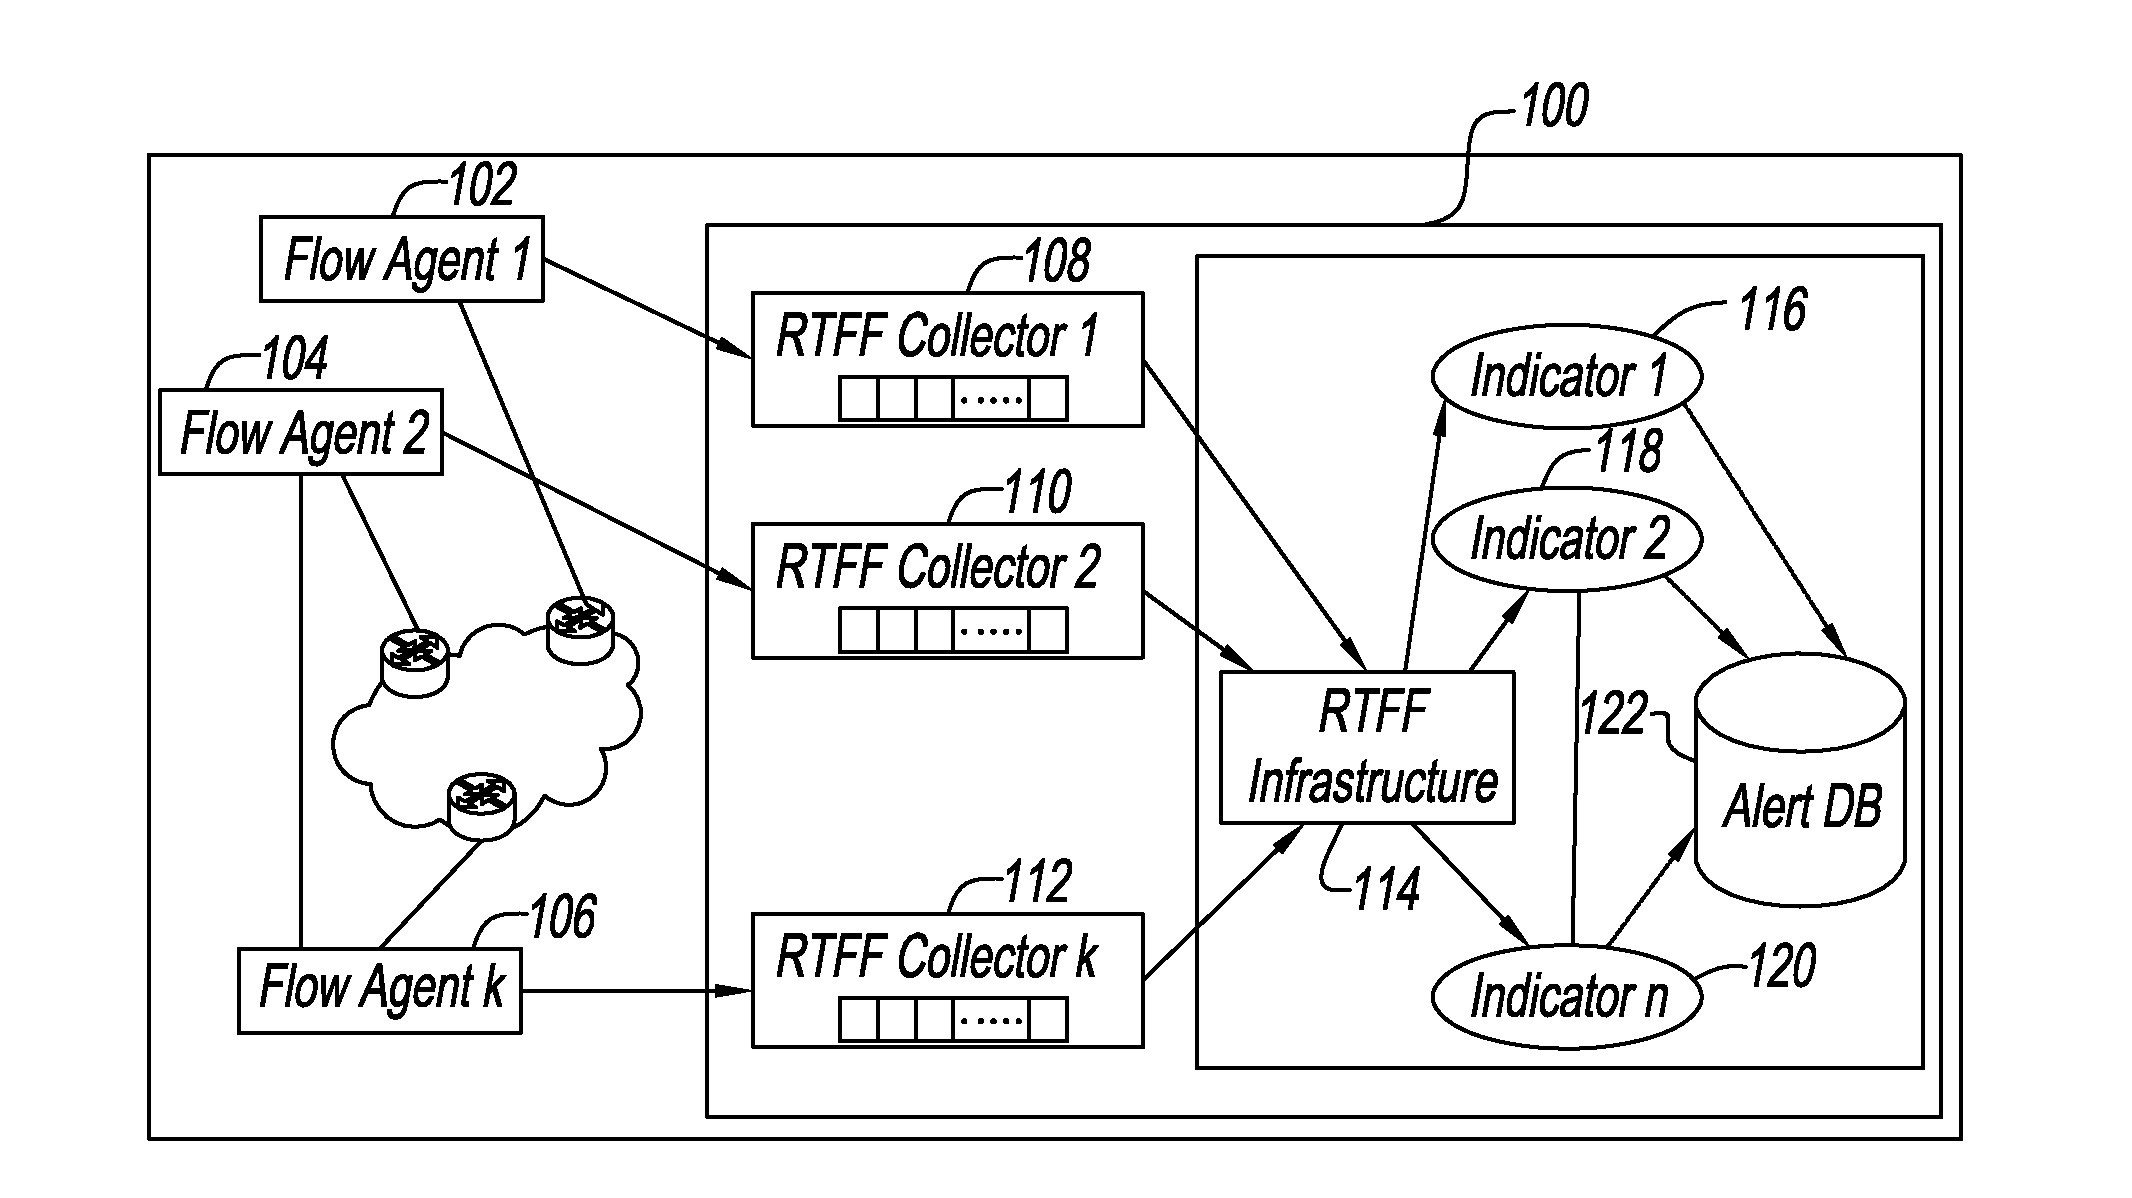 System and method for correlating historical attacks with diverse indicators to generate indicator profiles for detecting and predicting future network attacks